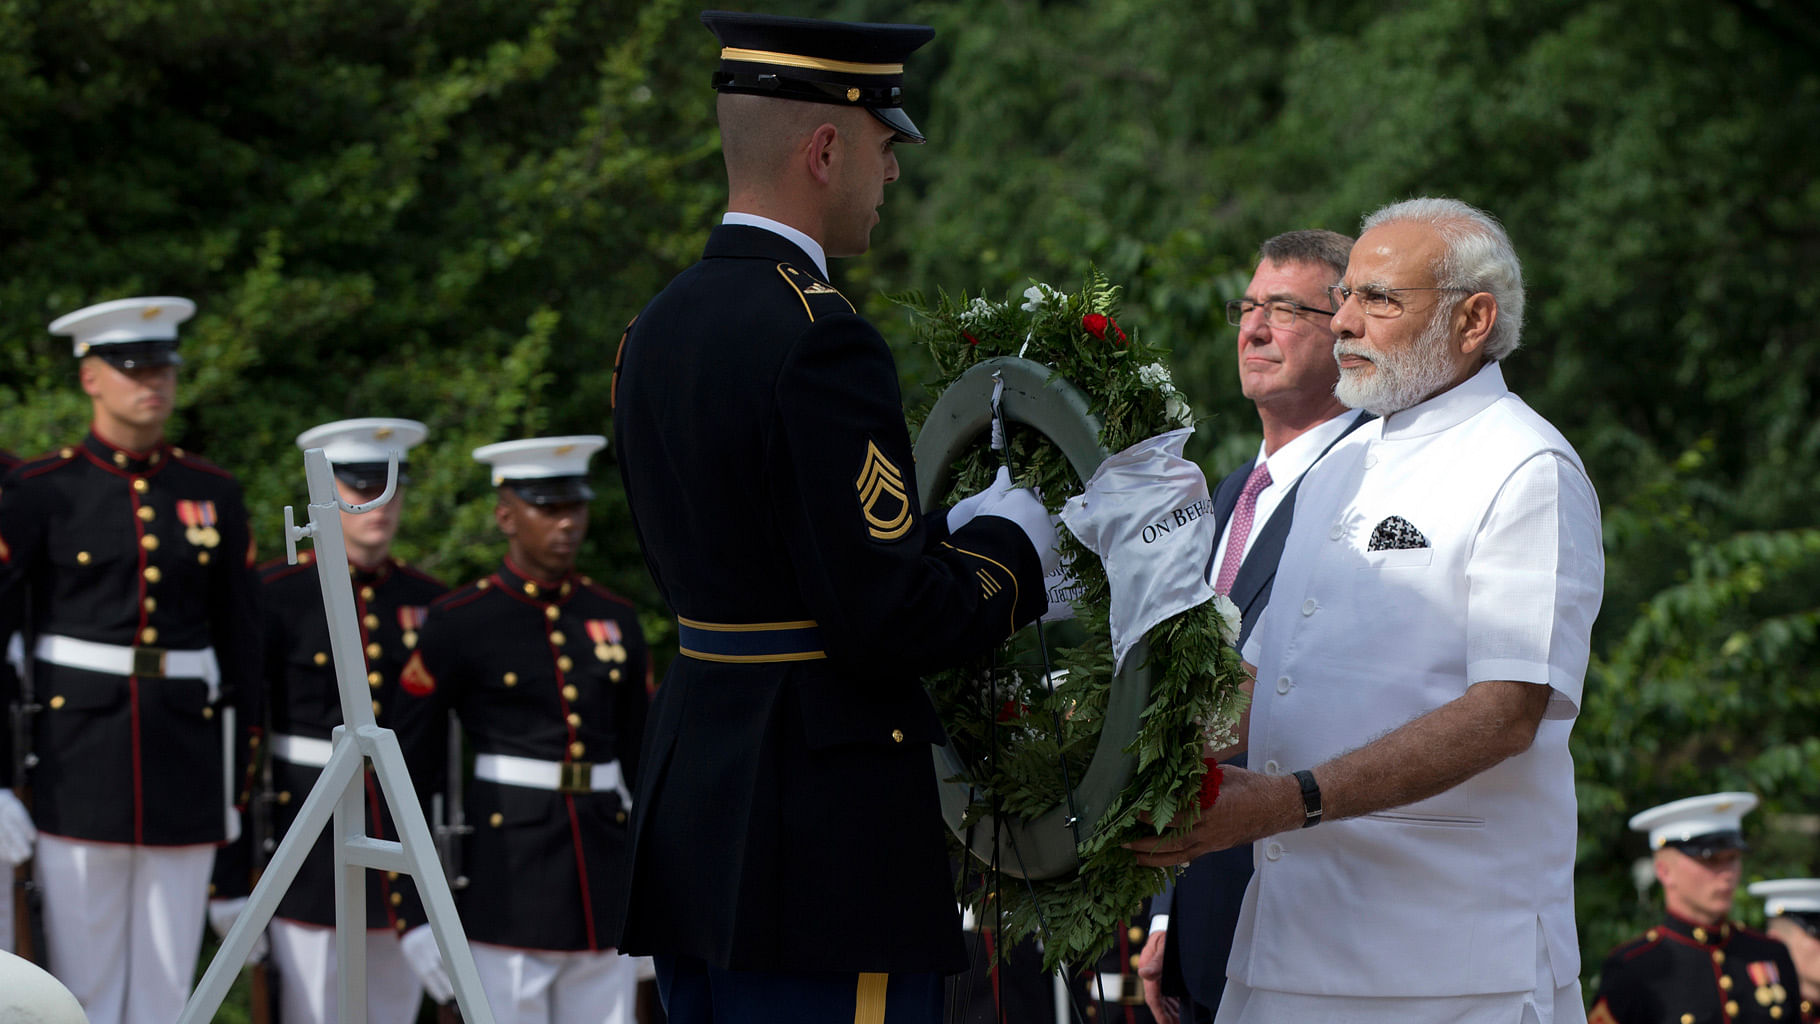 

Narendra Modi, right, with Secretary of Defense Ash Carter, right of Modi, lays a wreath at the Tomb of the Unknowns at Arlington National Cemetery in the US on Monday, 6 June 2016. (Photo: AP)